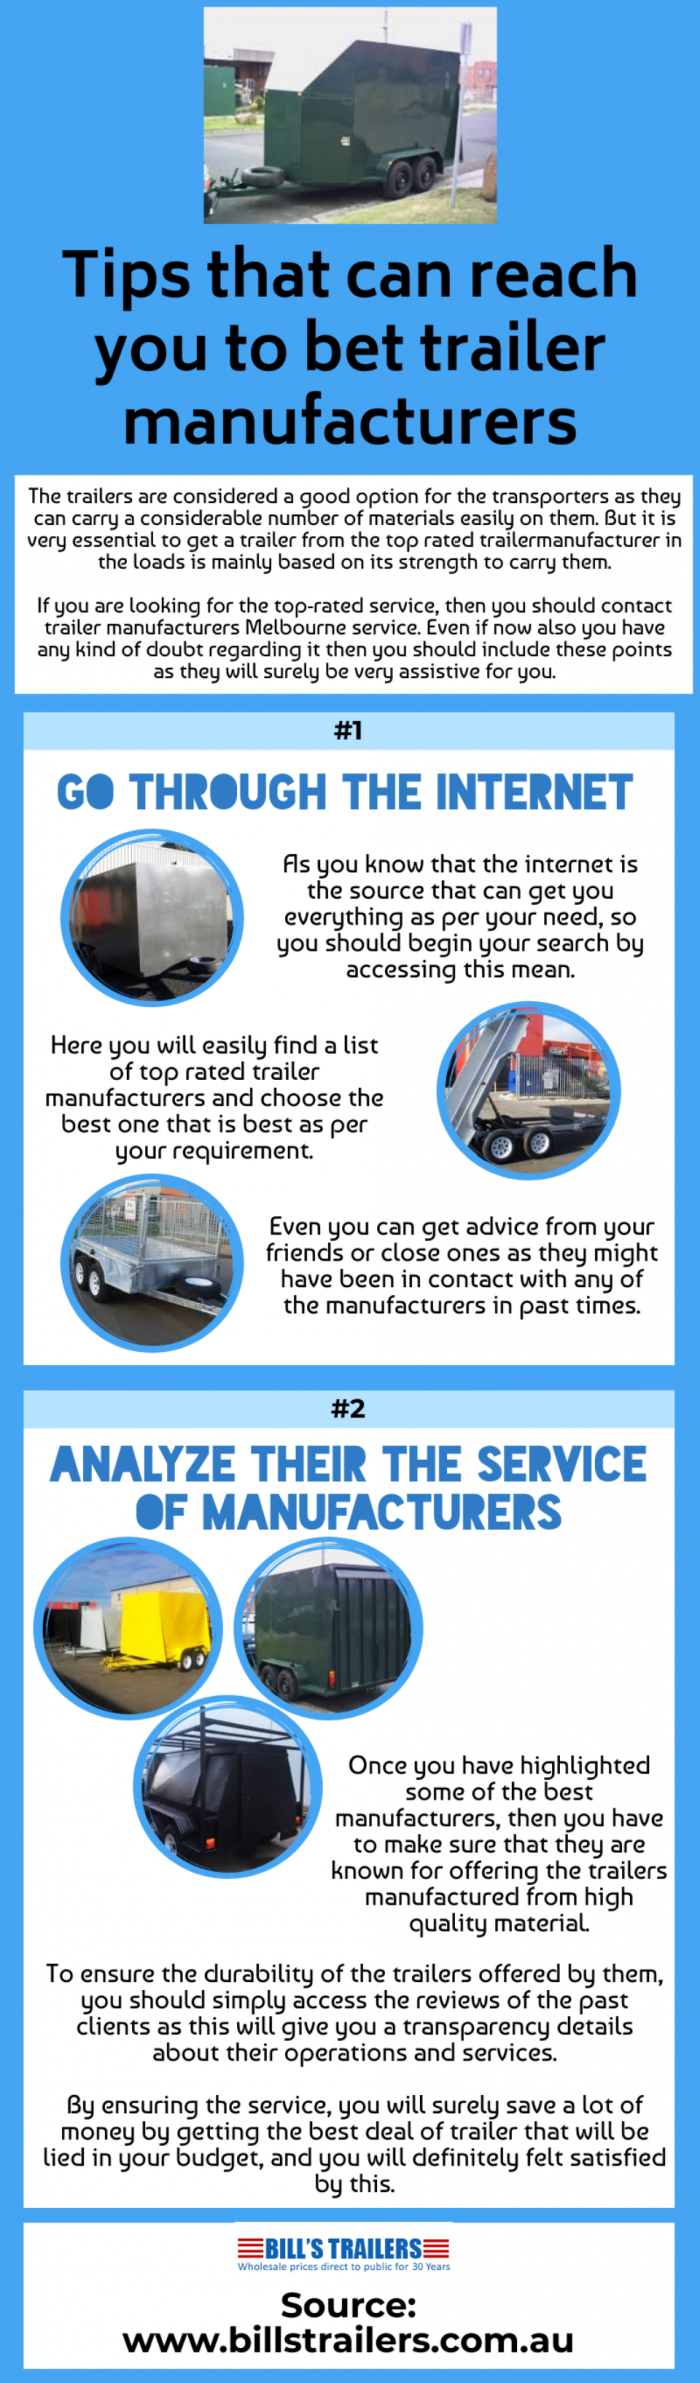 Some important things to keep in mind while buying a trailer